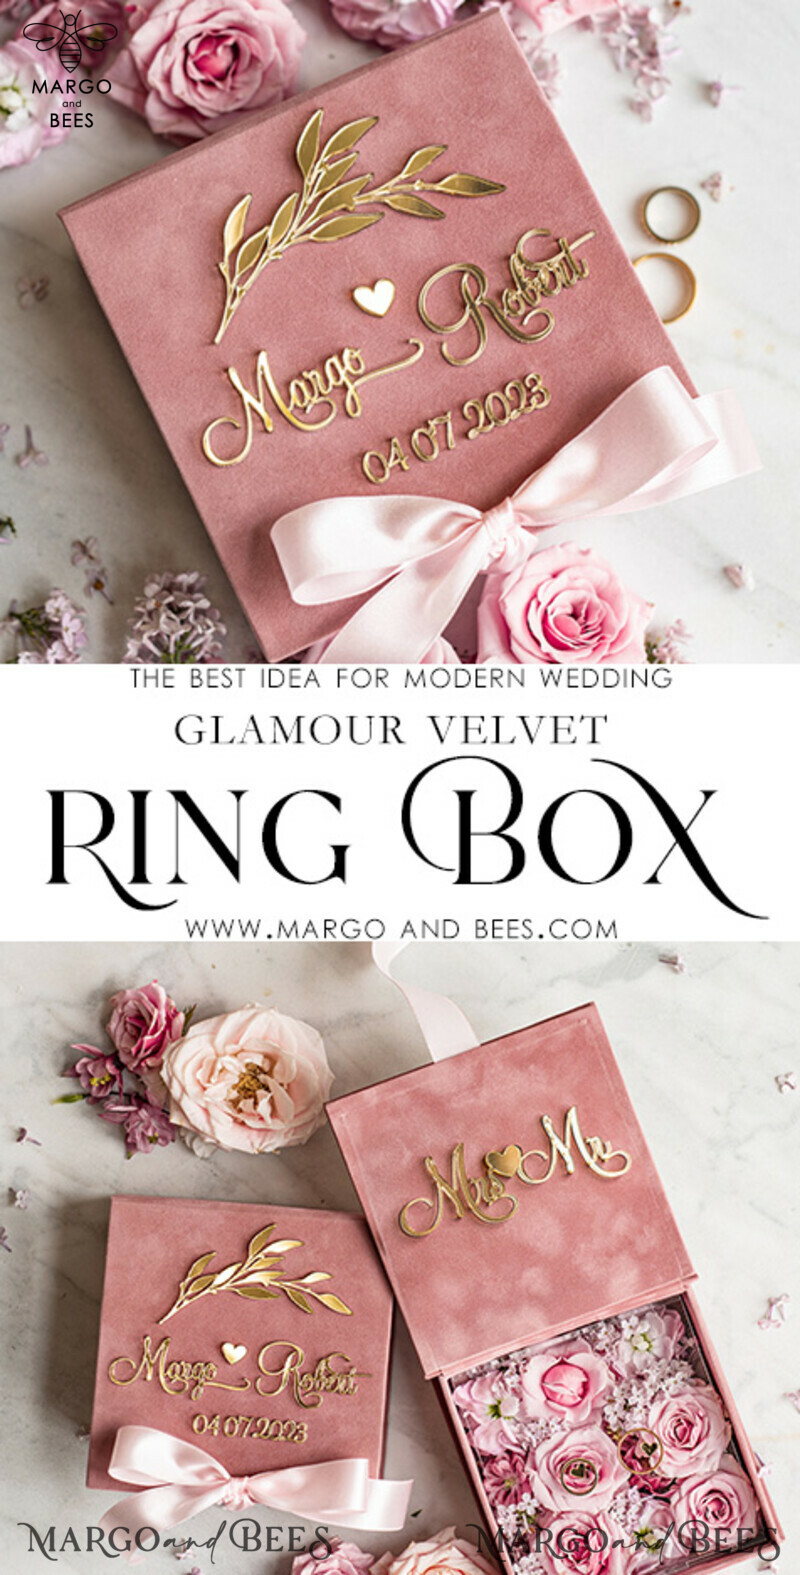 Custom Blush Pink Golden Velvet Wedding Ring Box for Glamorous Wedding Ceremony: Double Ring Box with His and Hers Compartments in Luxury Velvet-3